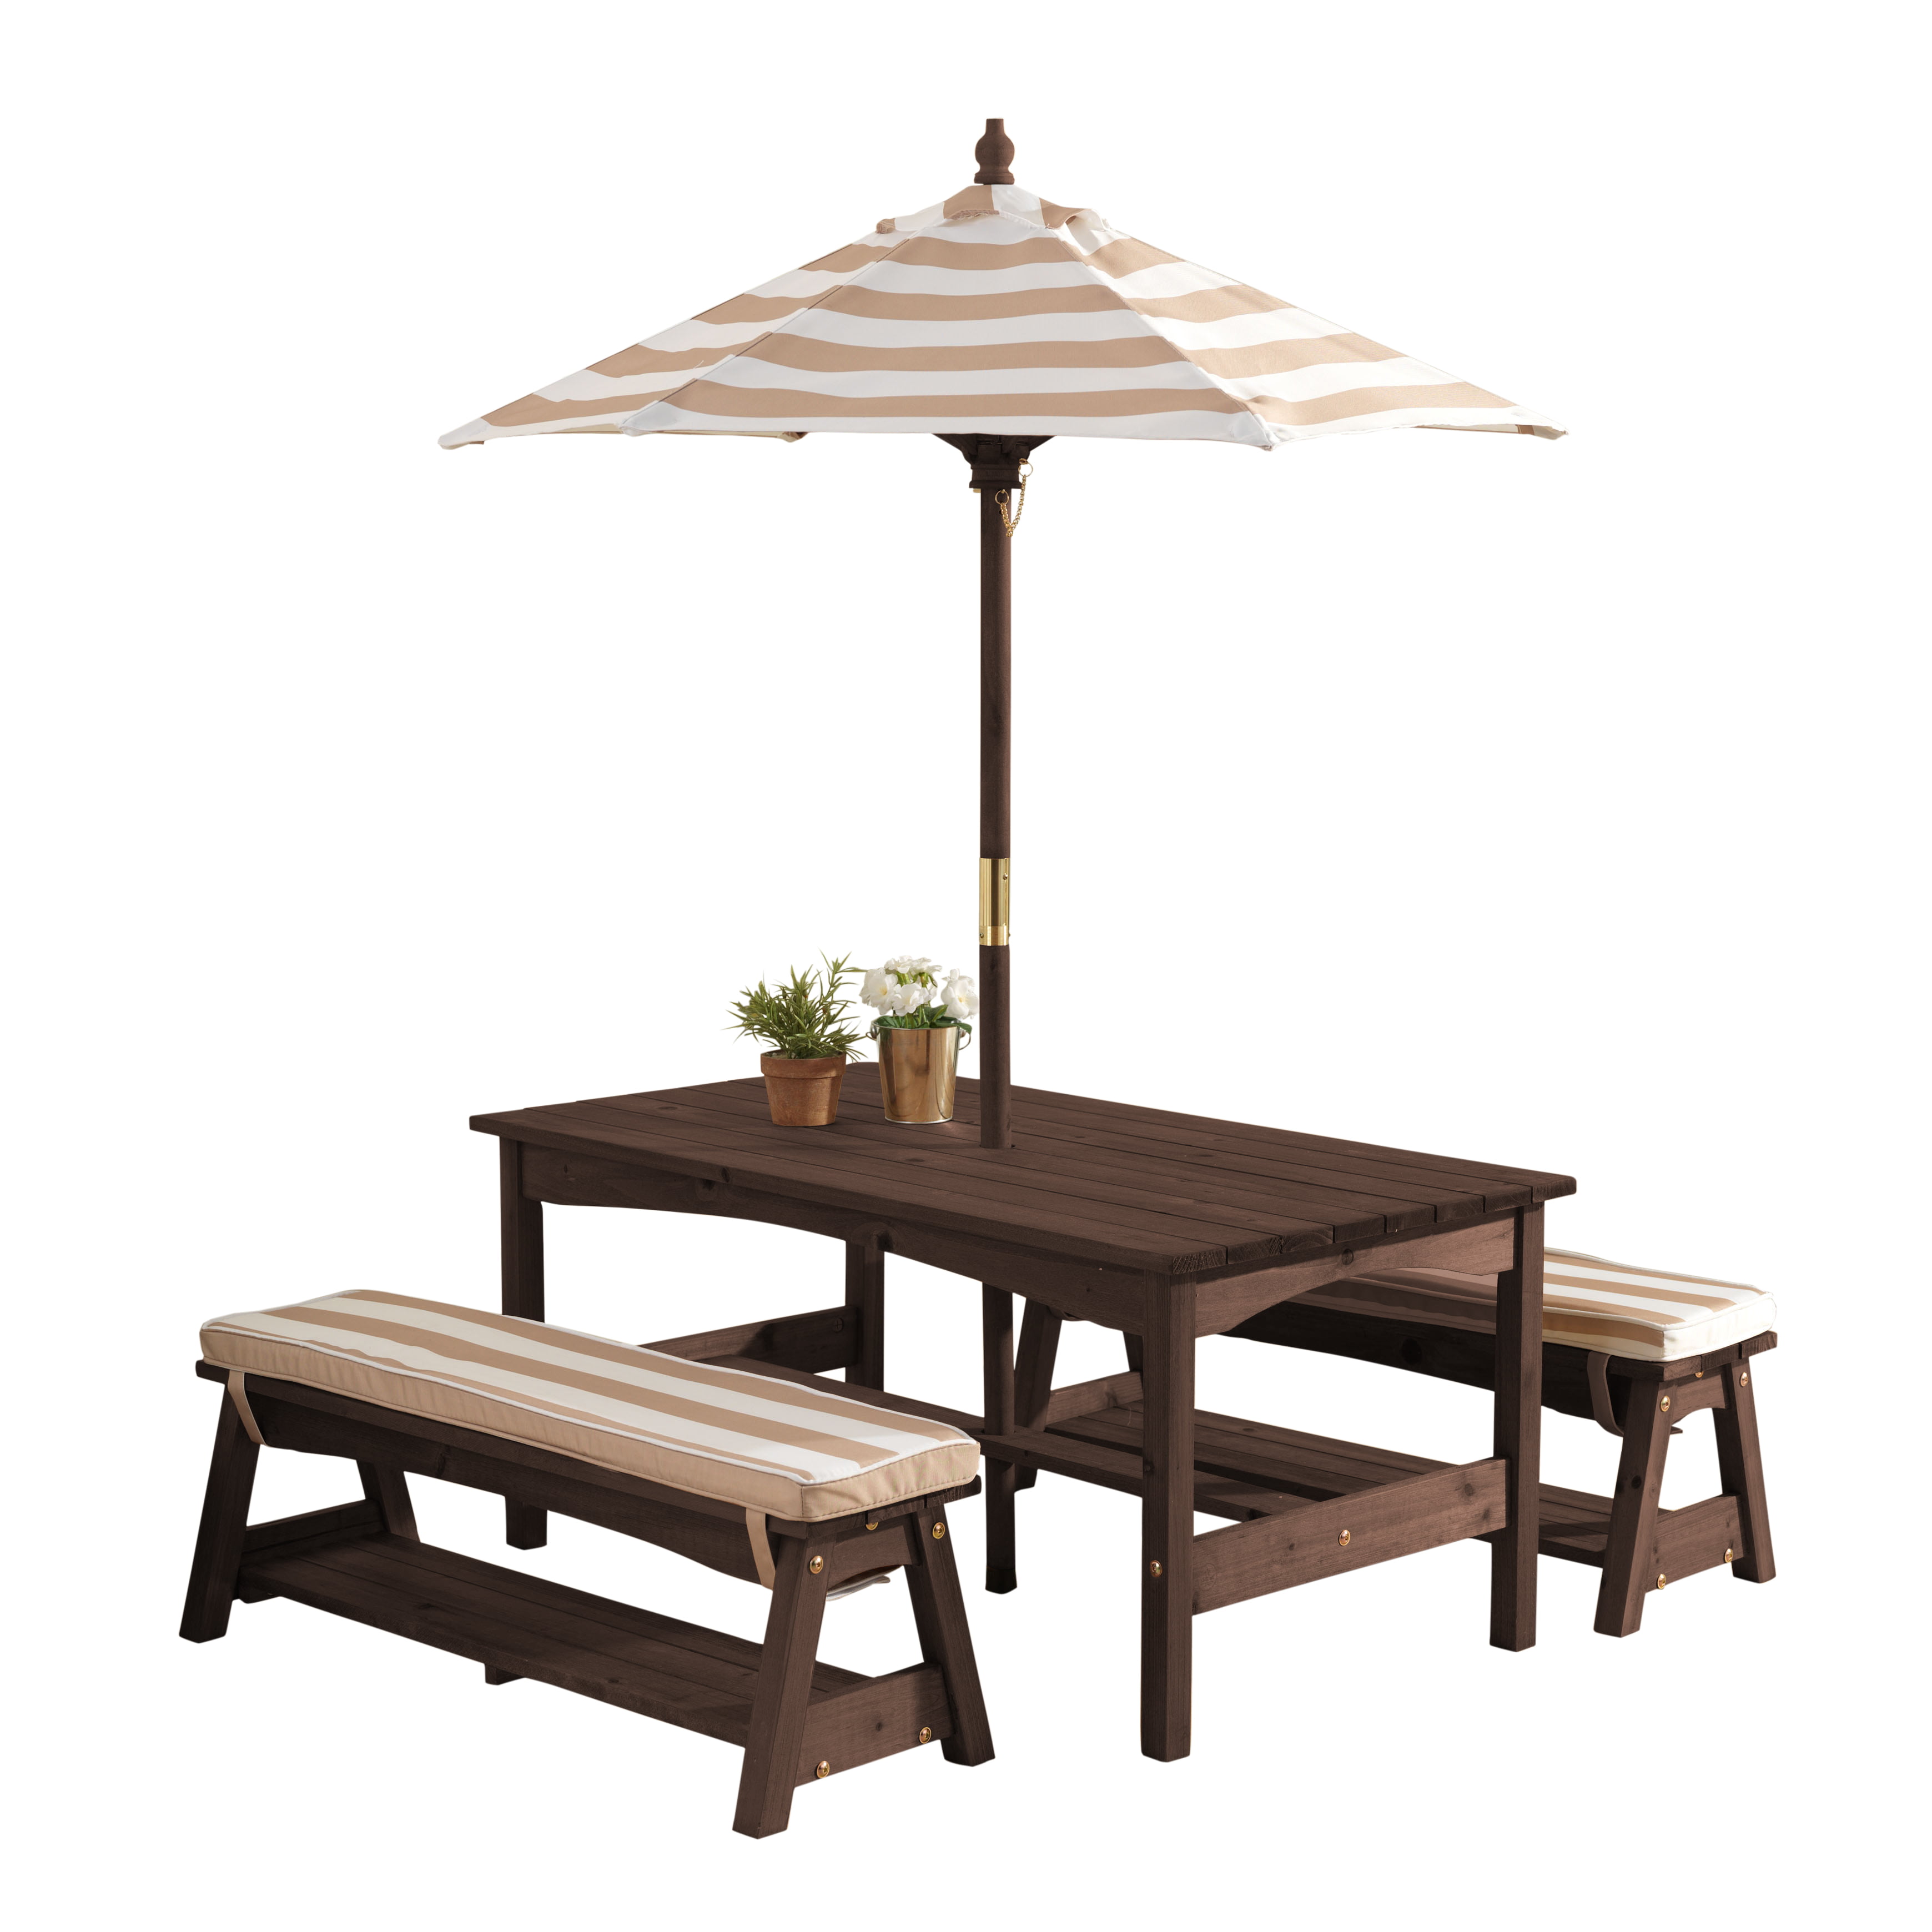 childrens outdoor table